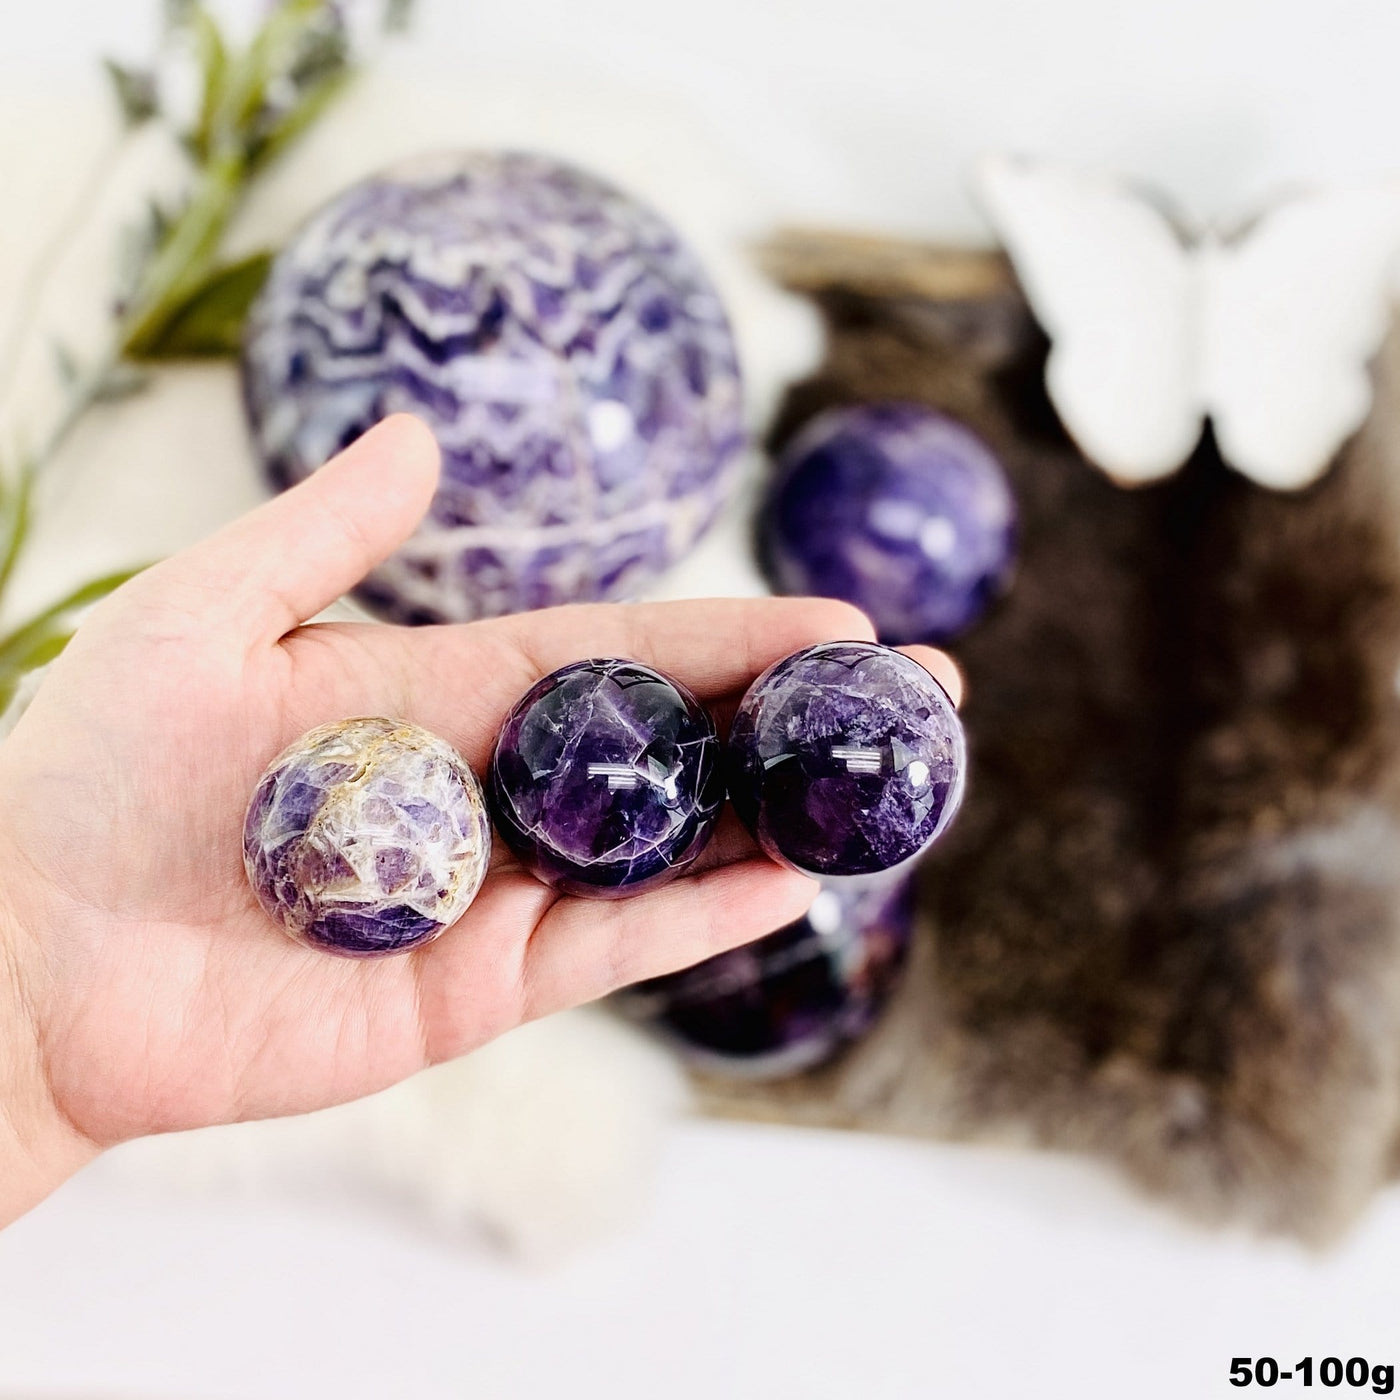 Chevron Amethyst Polished Spheres in a hand, size under 50g-100g